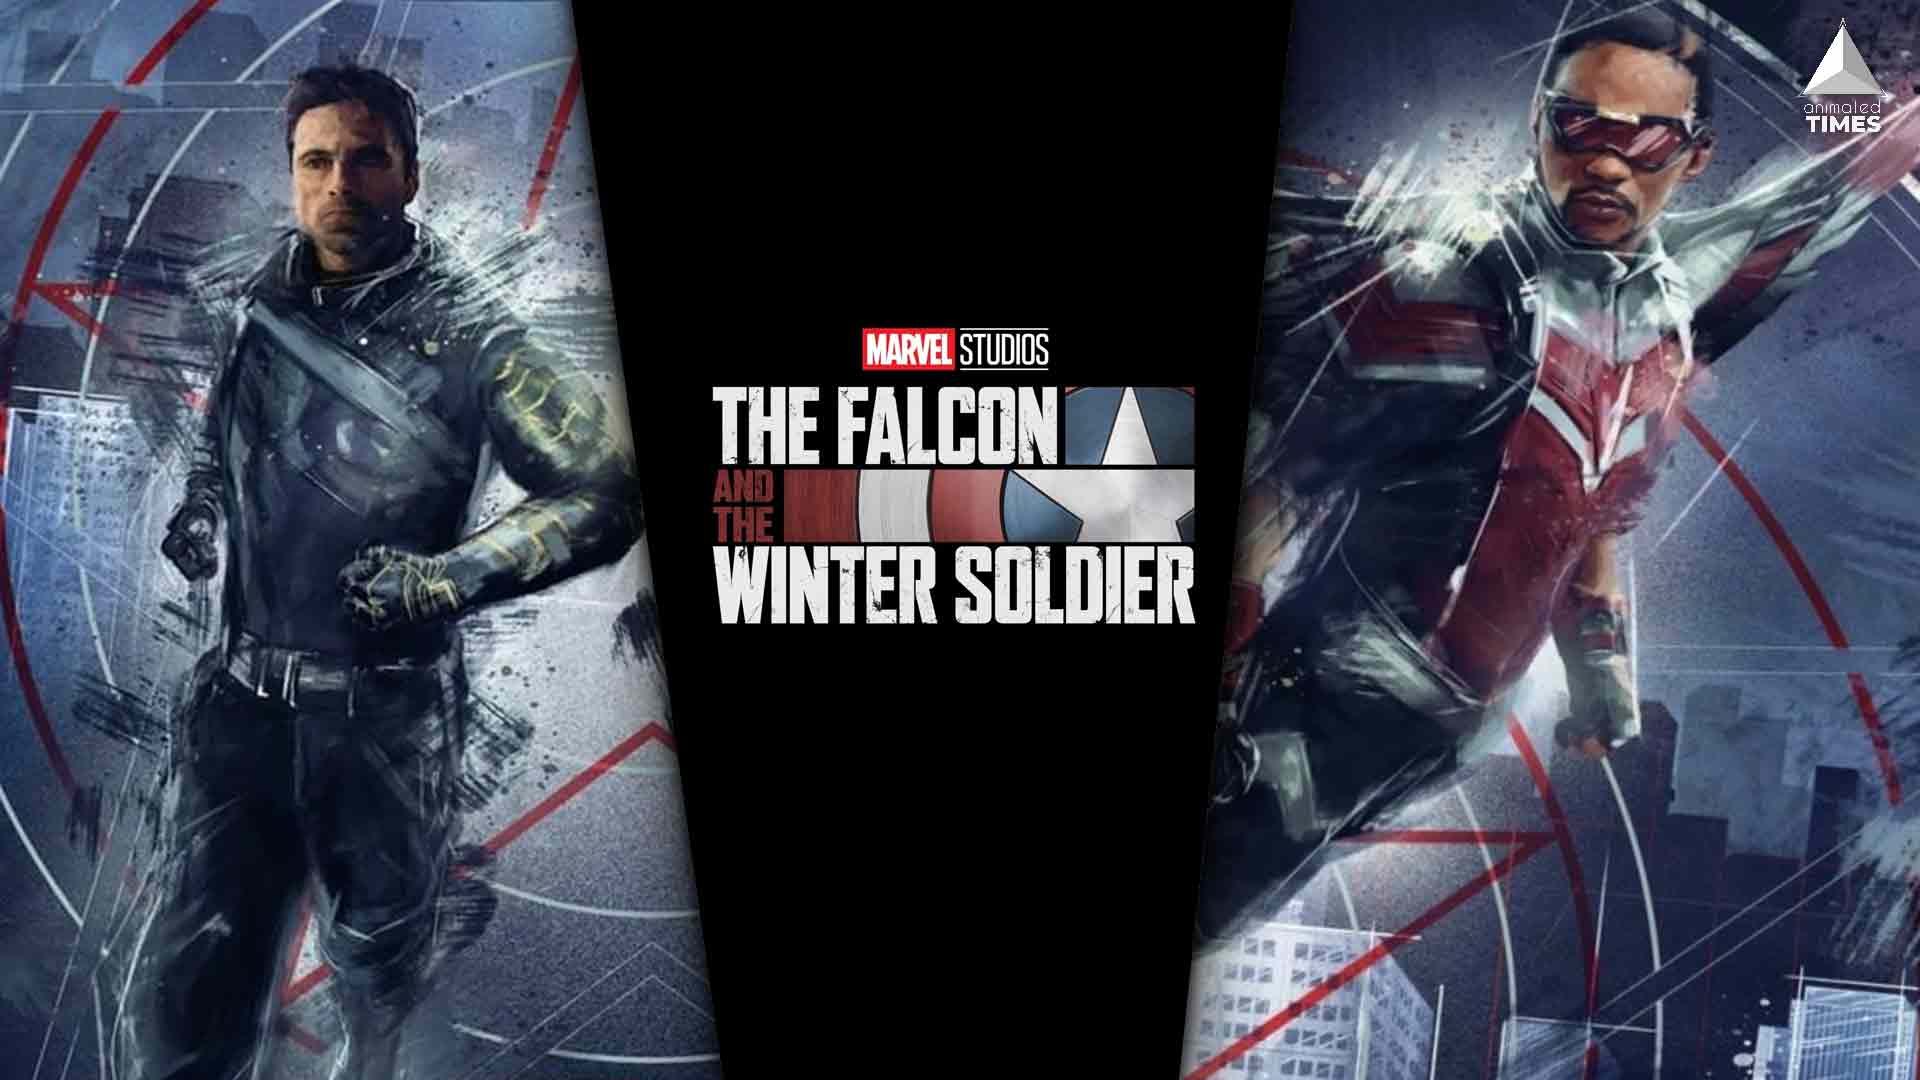 Marvel Has Revealed The Final Poster Of The Last Episode Of Falcon and the Winter Soldier